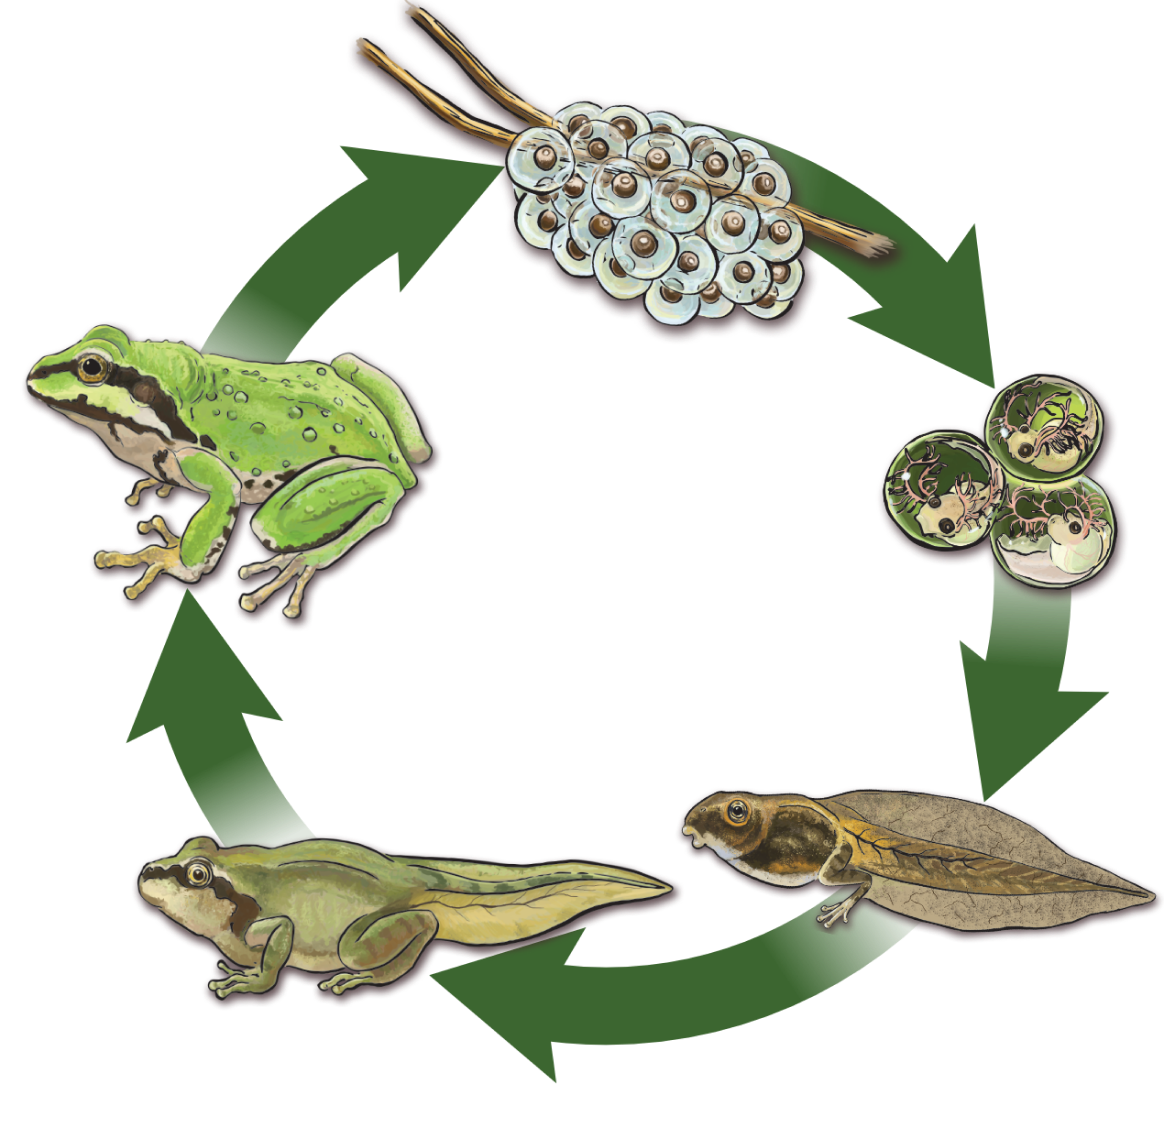 The lifecycle of a frog